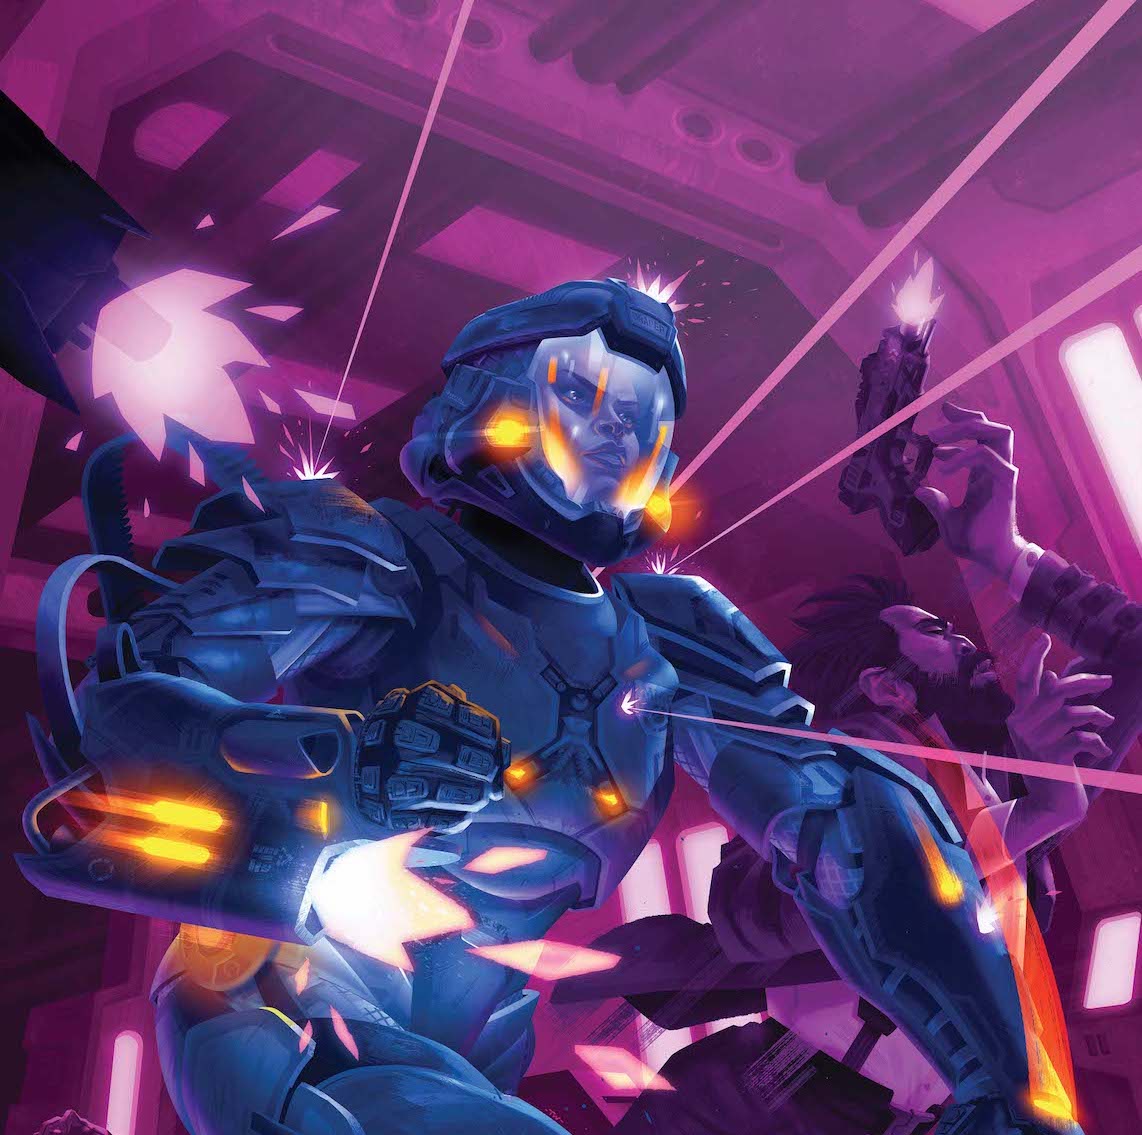 EXCLUSIVE BOOM! Preview: The Expanse #3